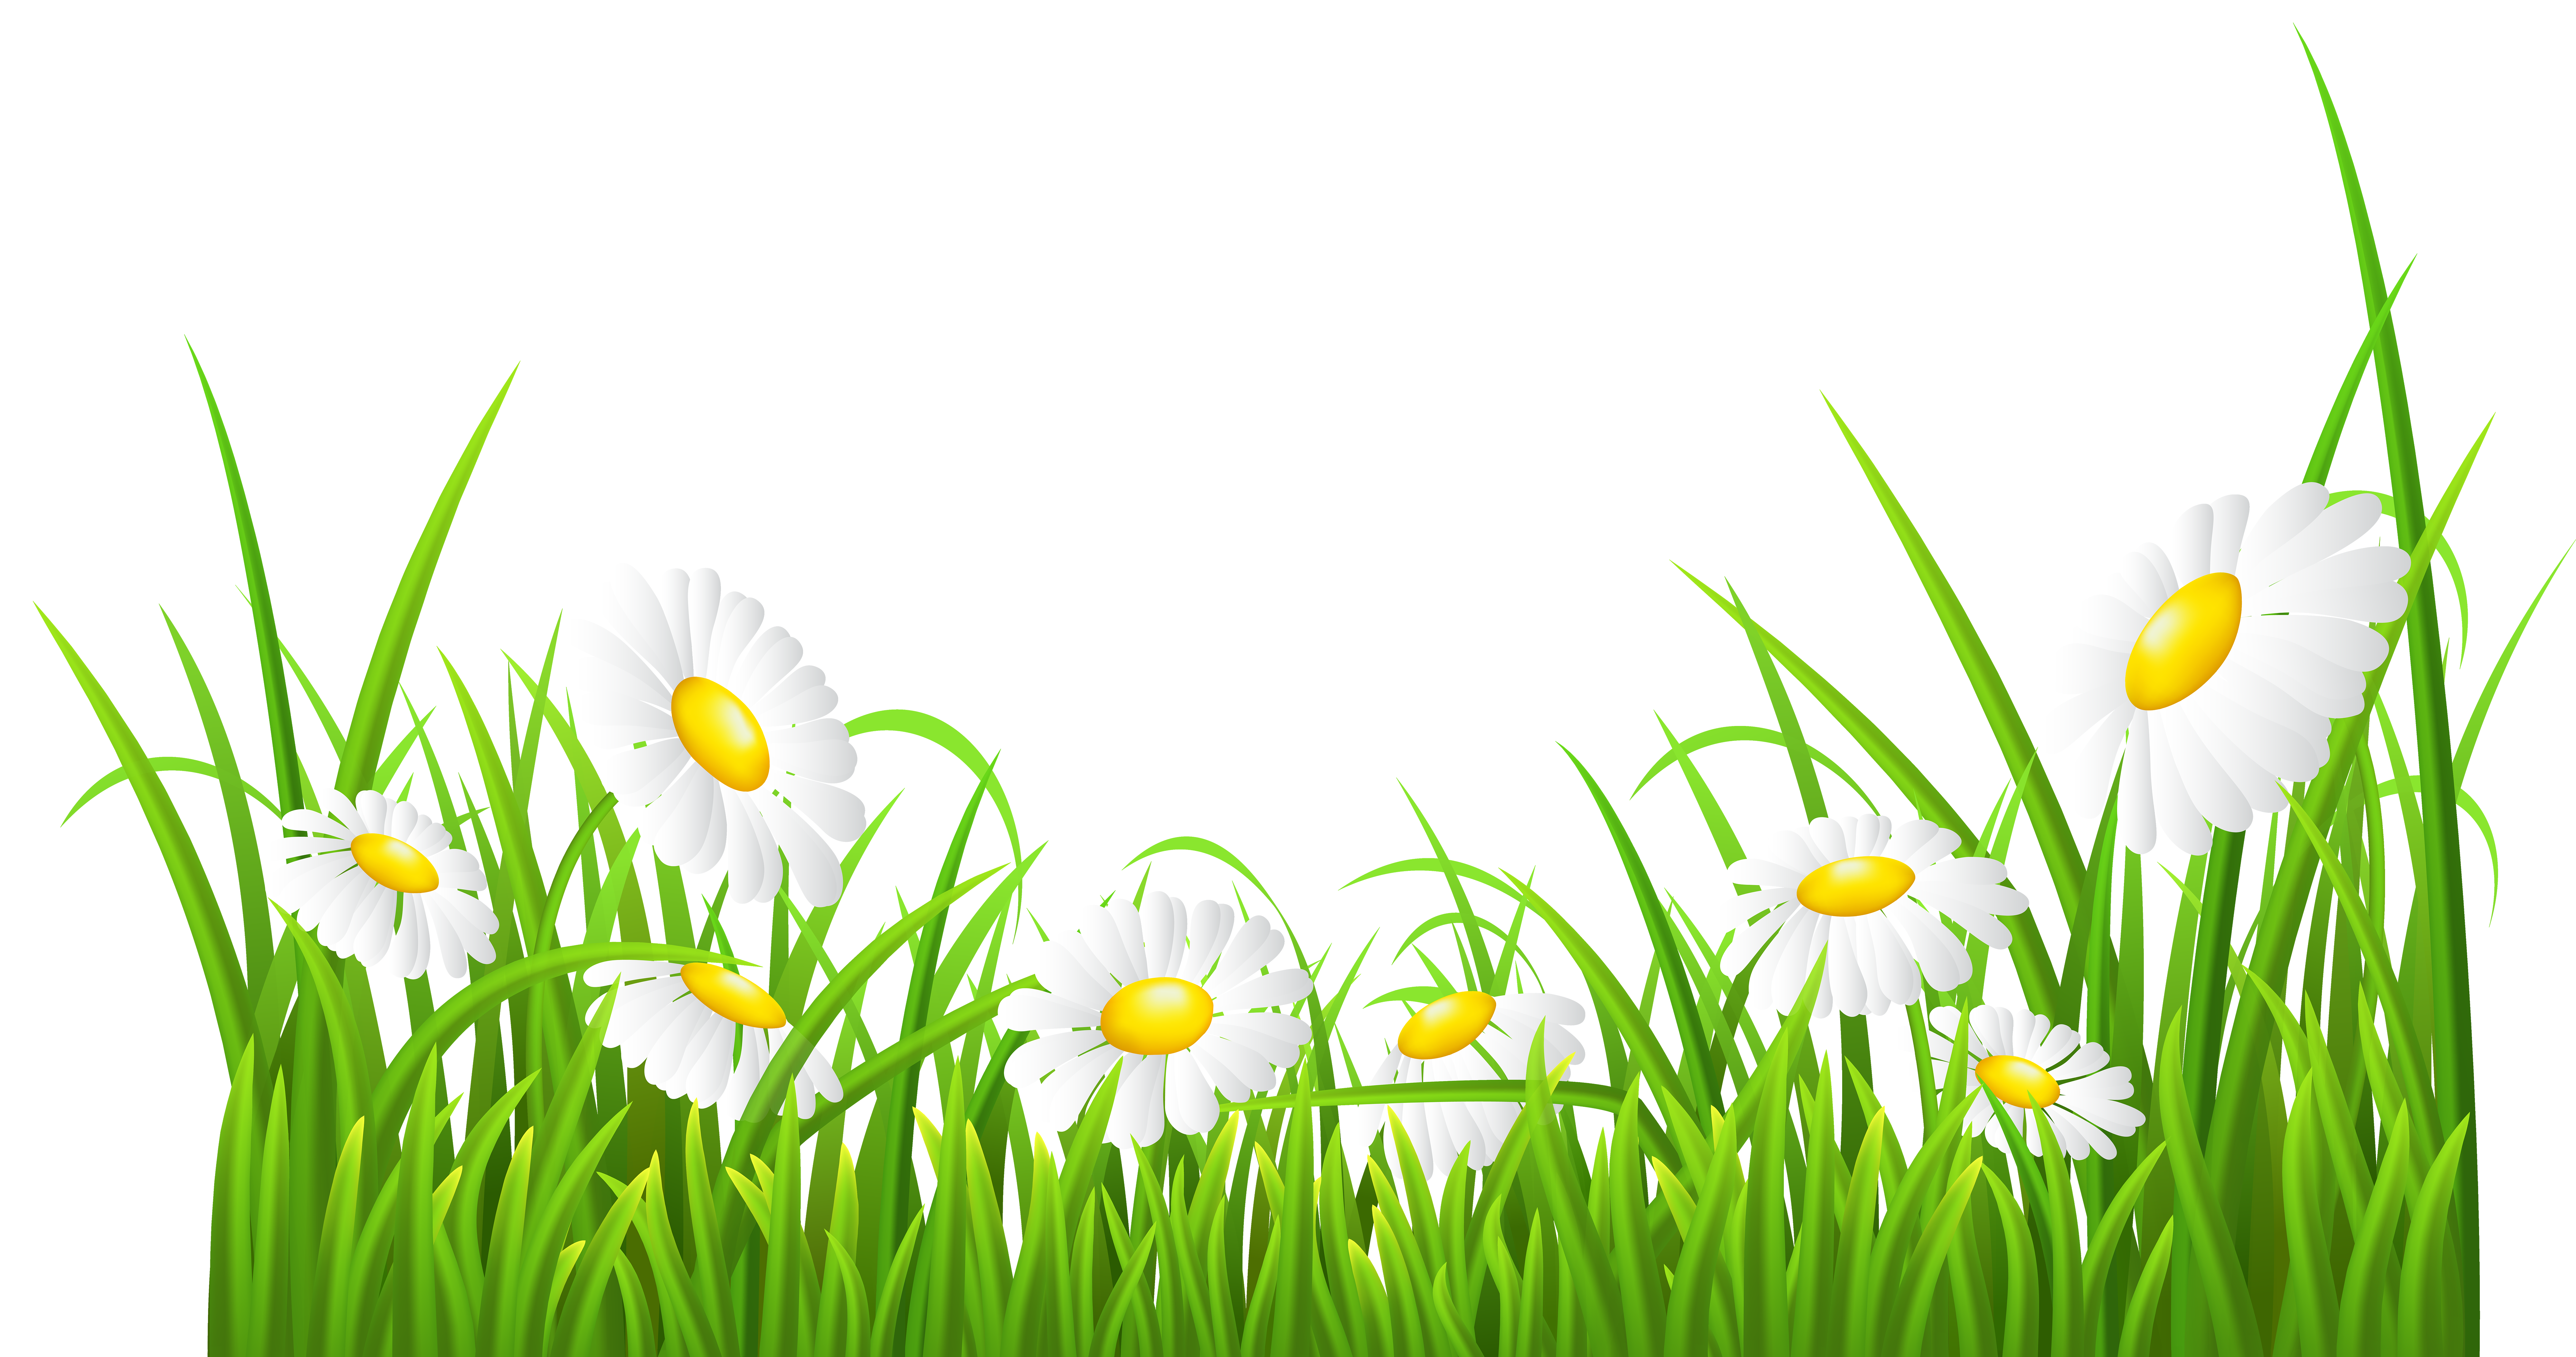 White daisies and transparent. Dandelion clipart grass